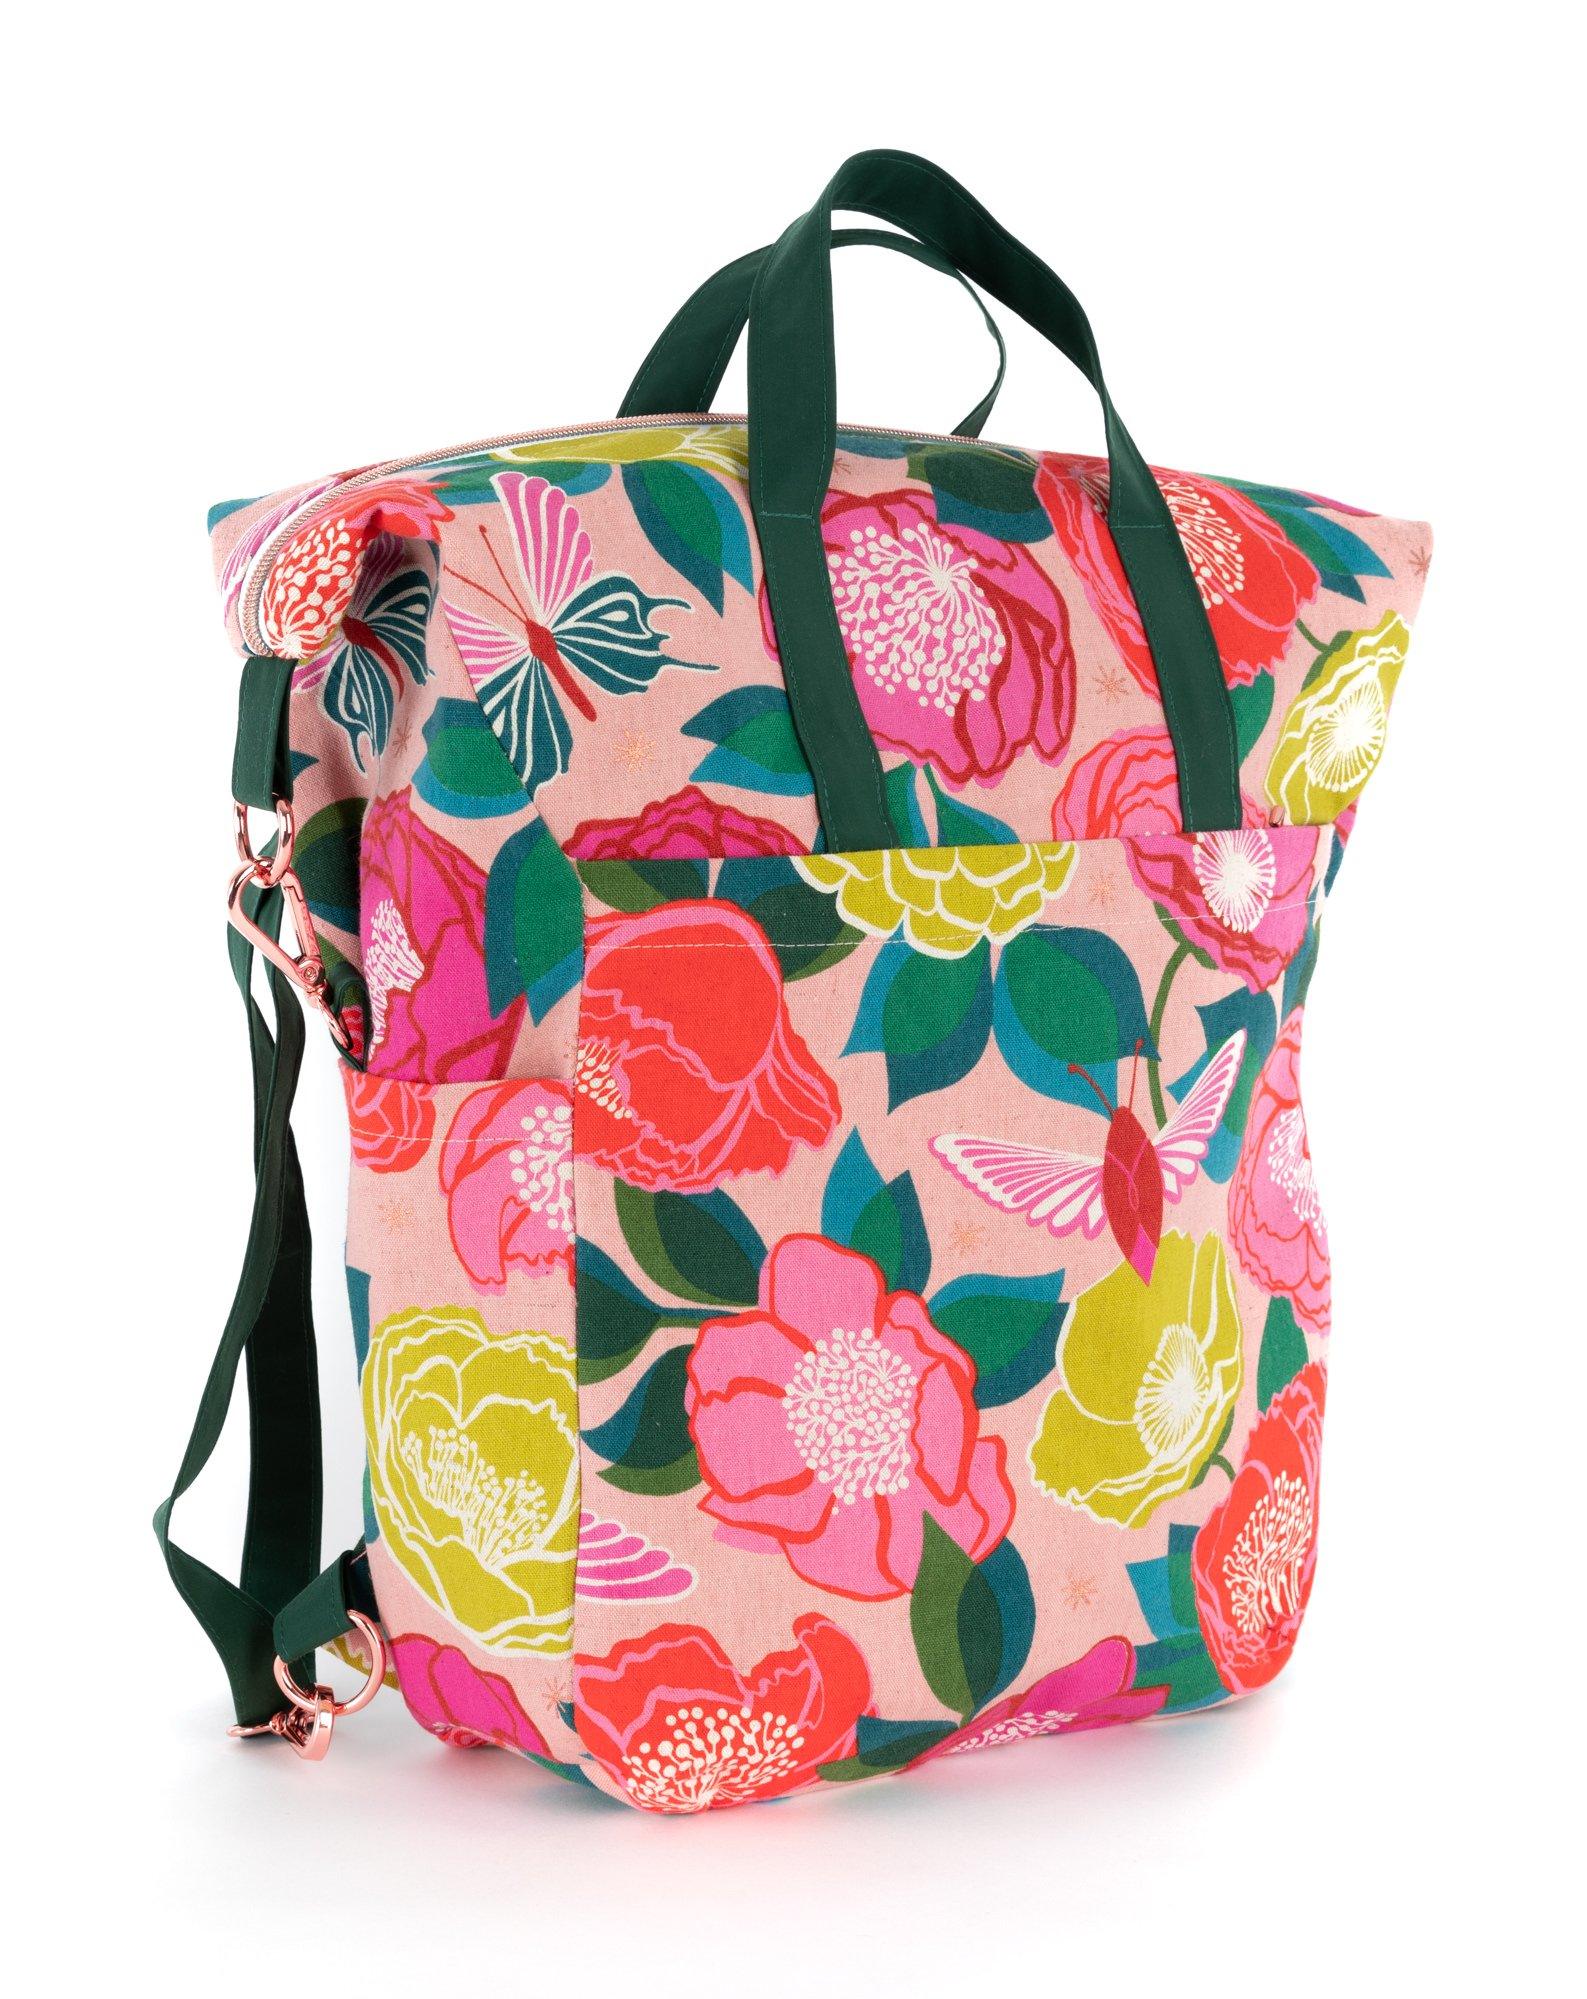 Tote with generous front pocket, made in Ruby Star Melody Miller canvas